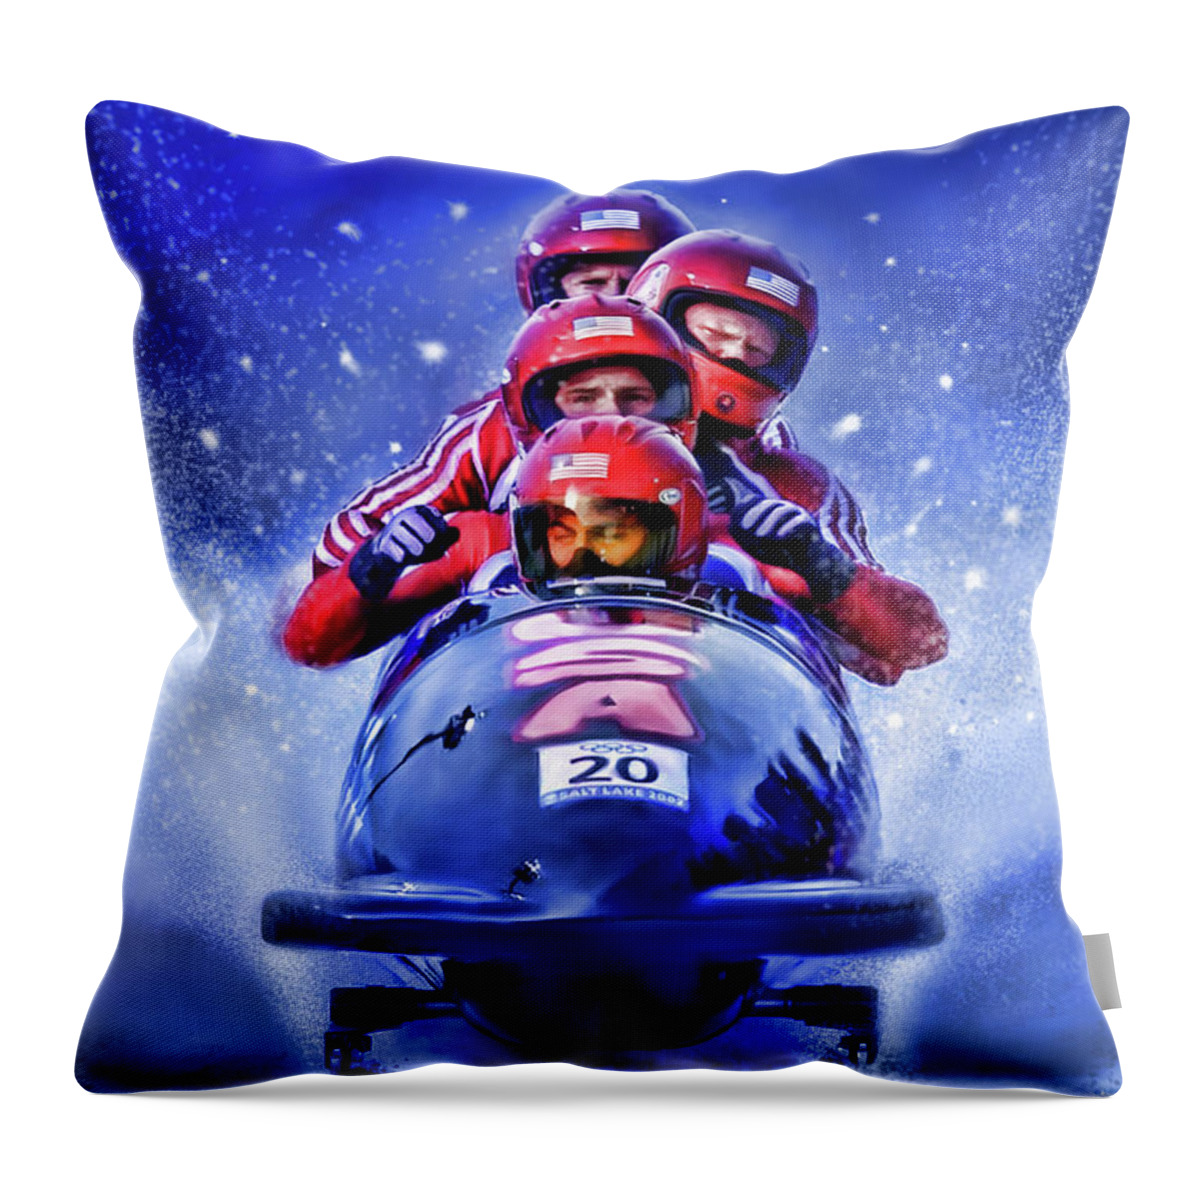 Bobsled Throw Pillow featuring the digital art Bobsled by David Luebbert